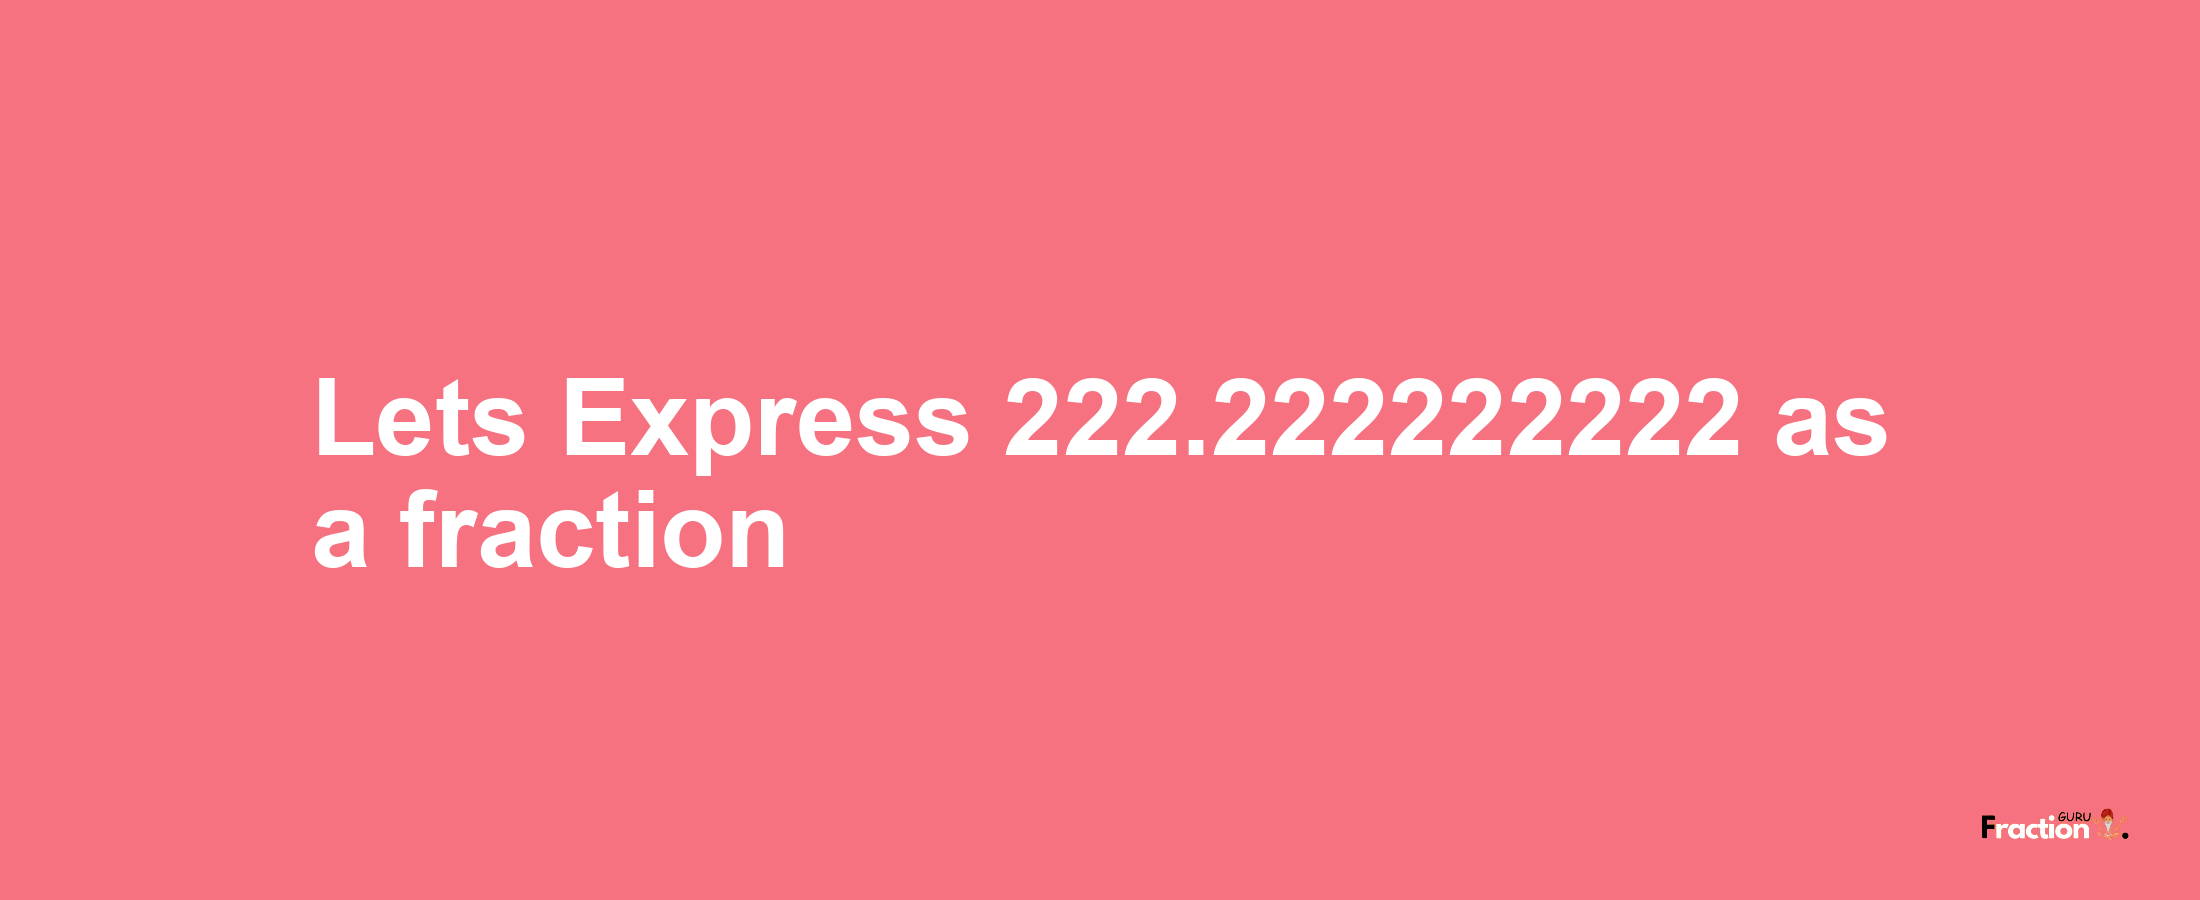 Lets Express 222.222222222 as afraction